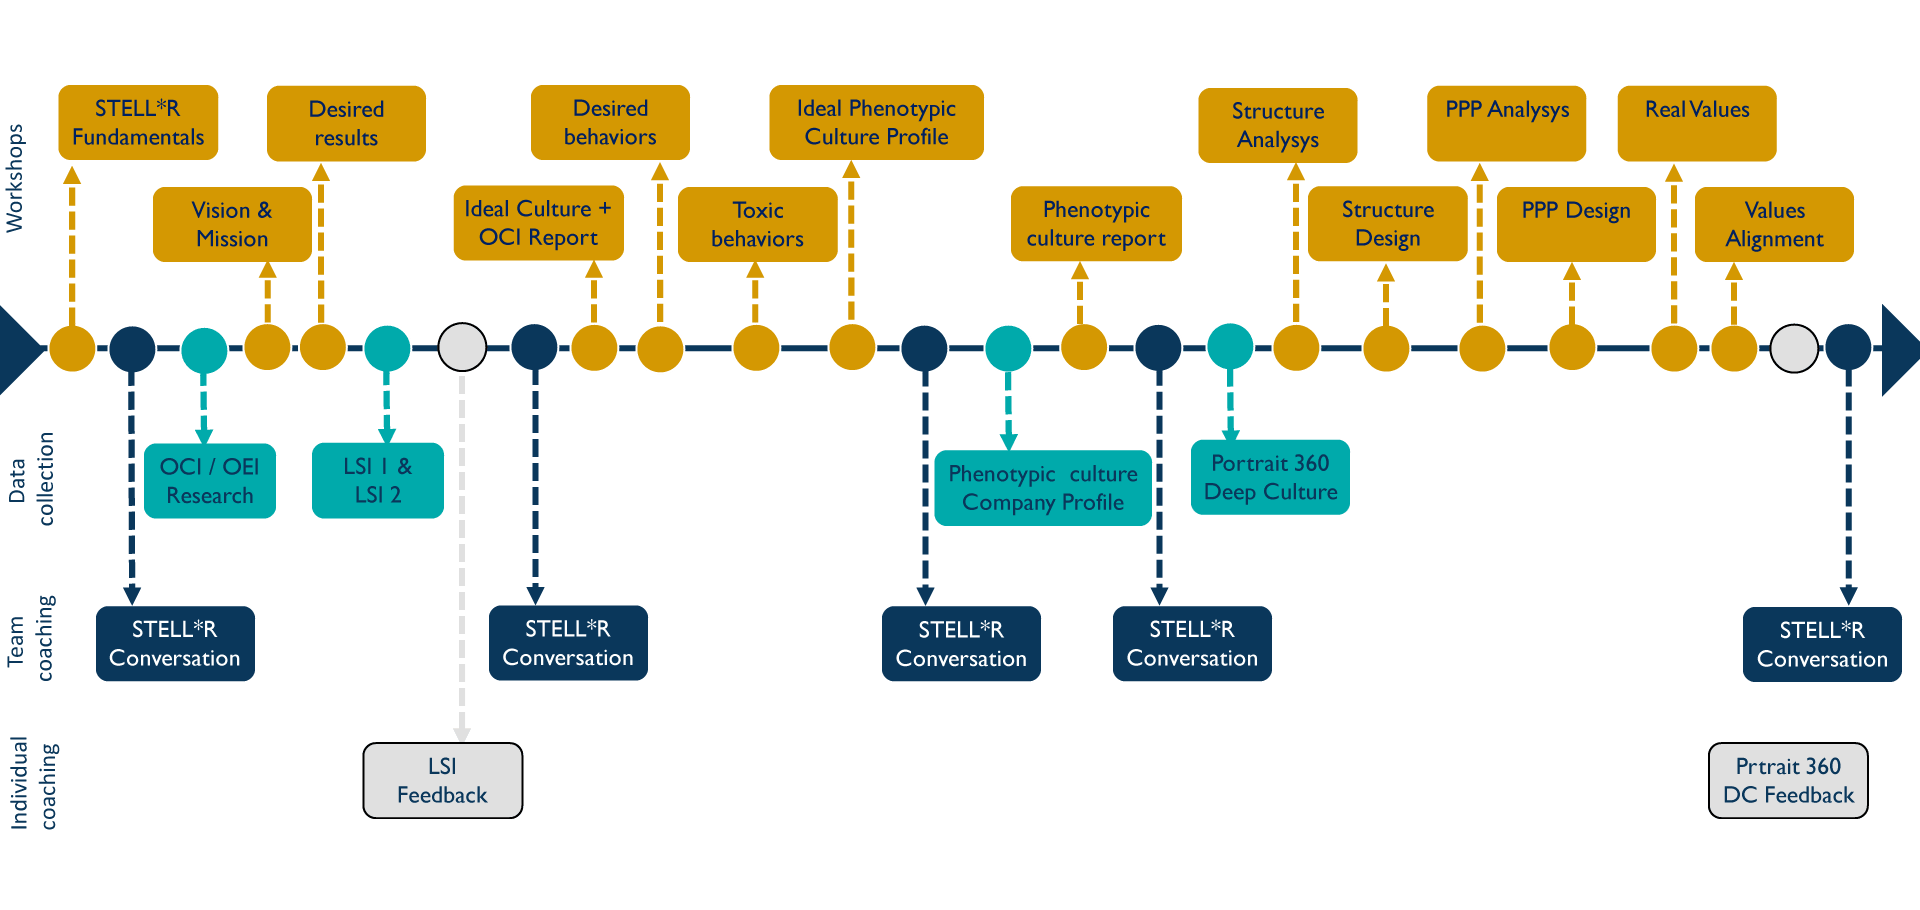 Stell*R activation kit rollout map